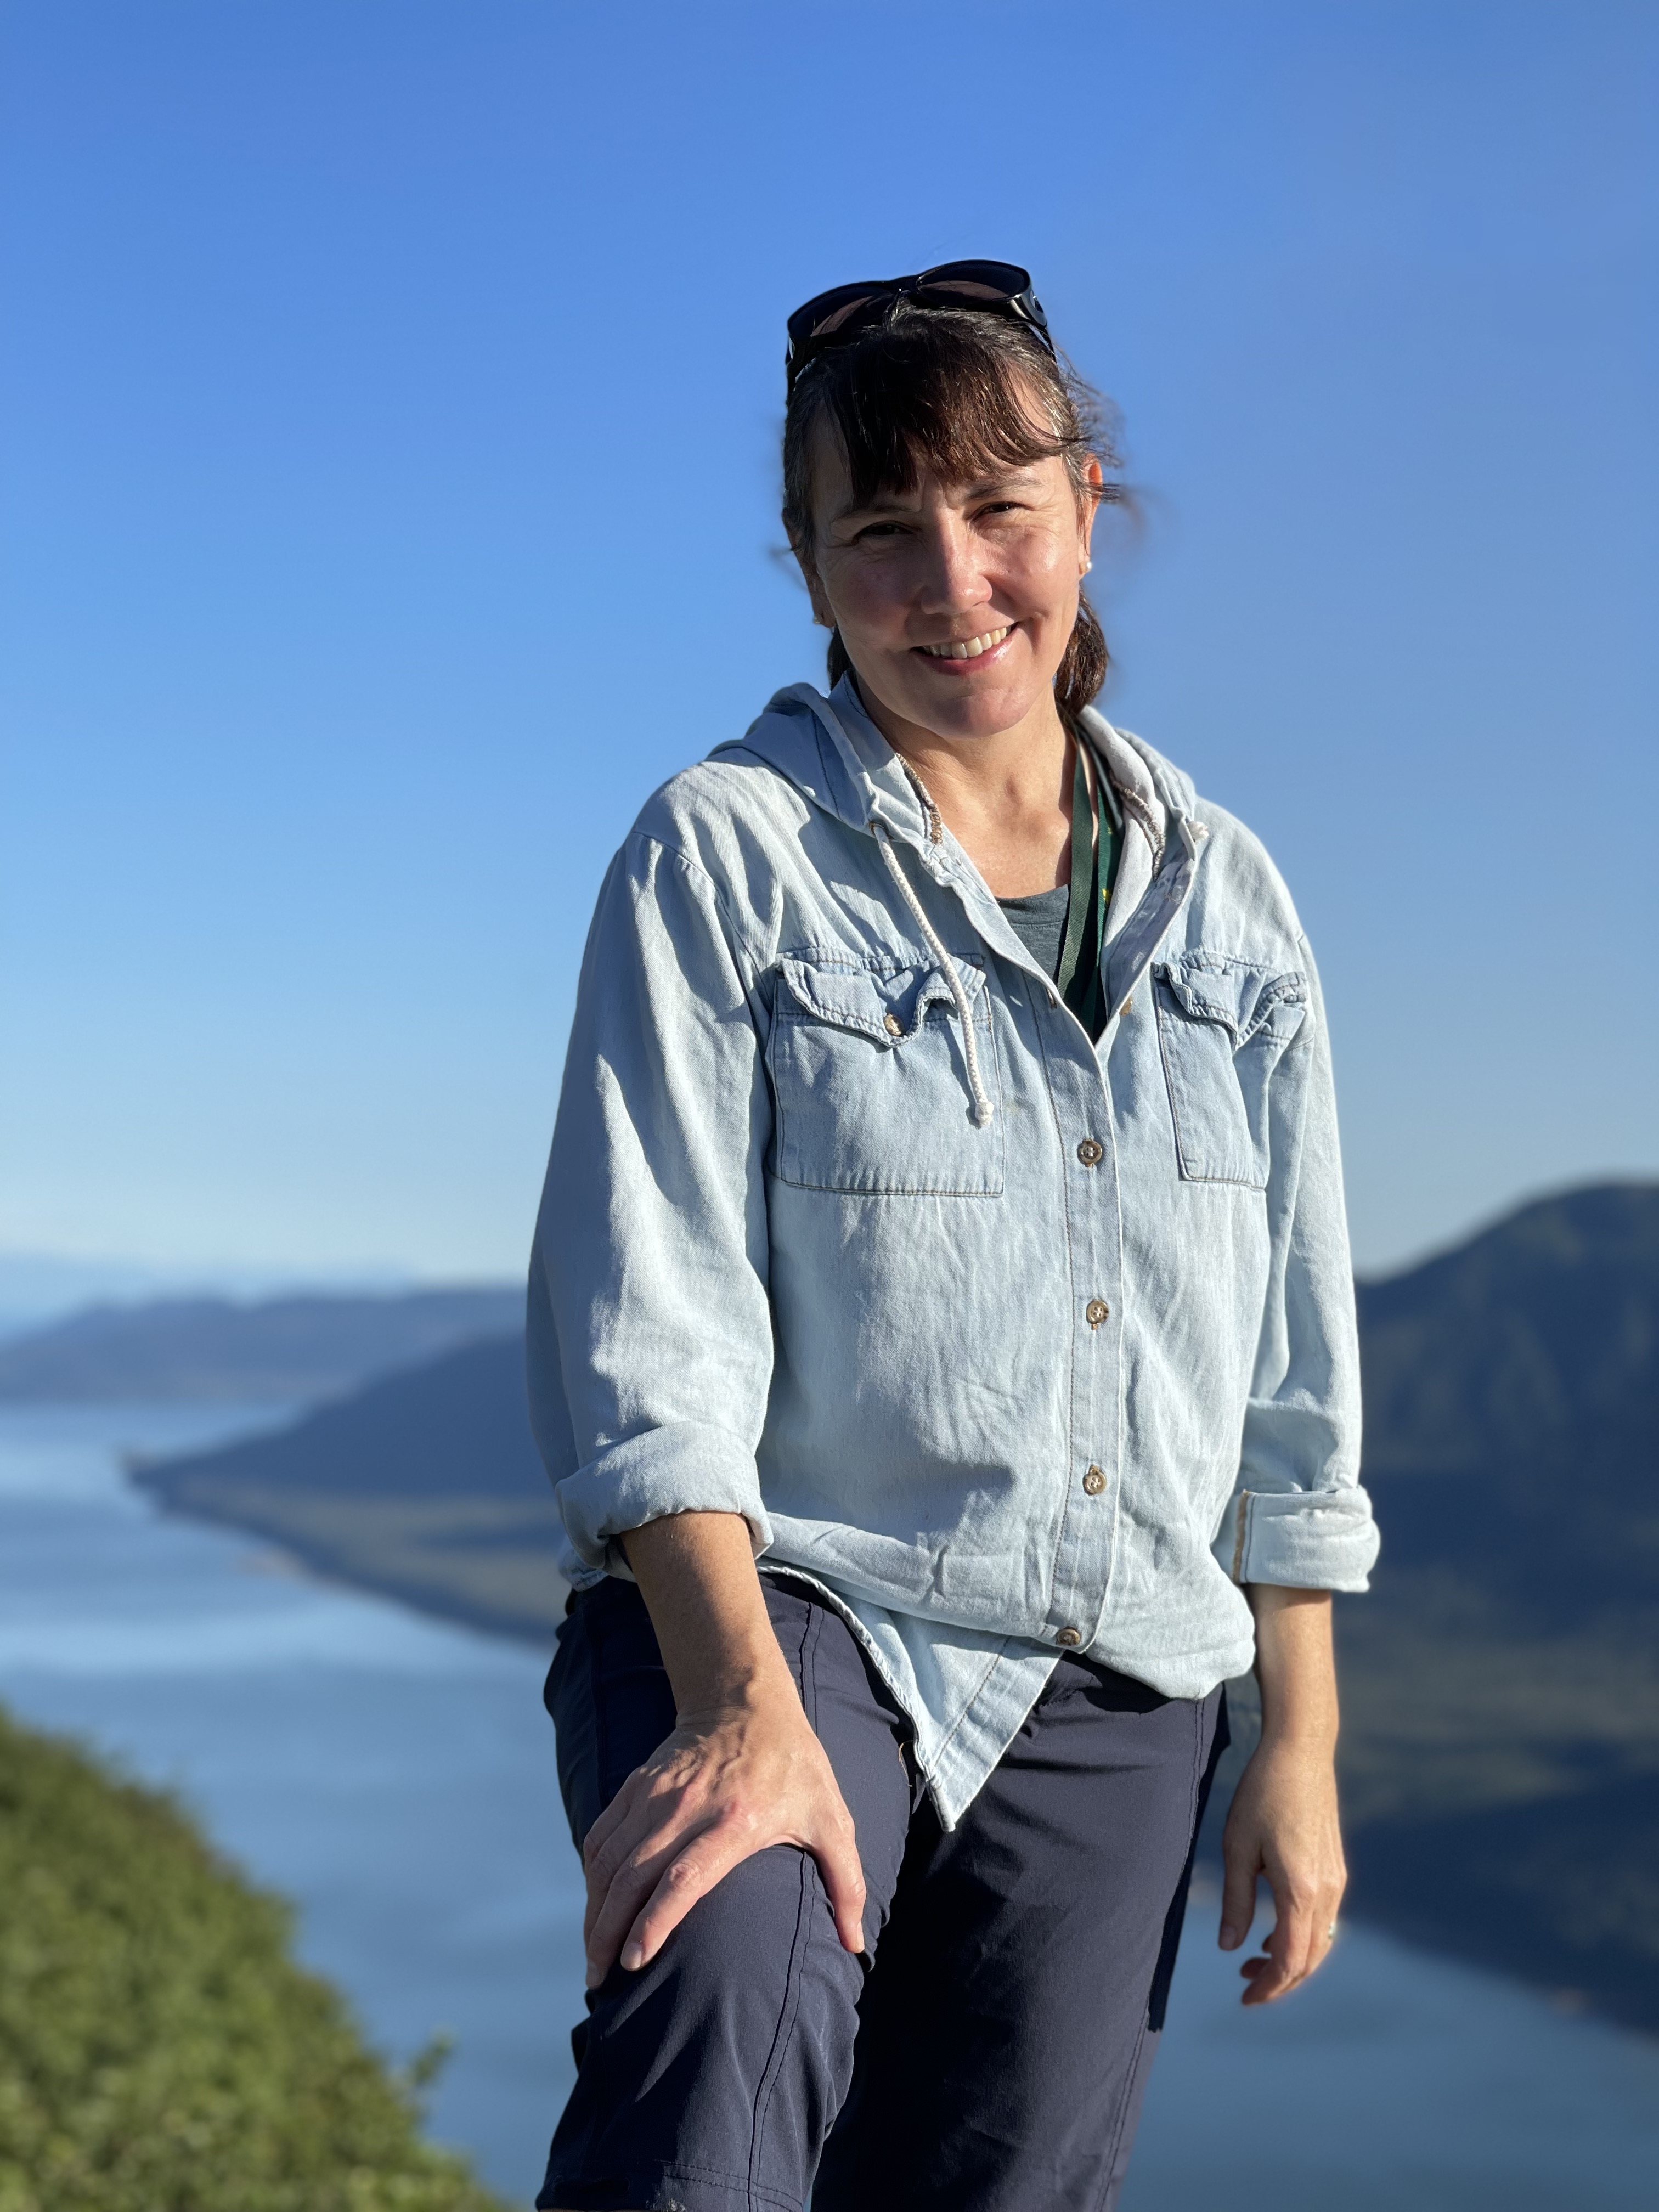 photo of linda standing on top of mountain with clear blue sky in the background